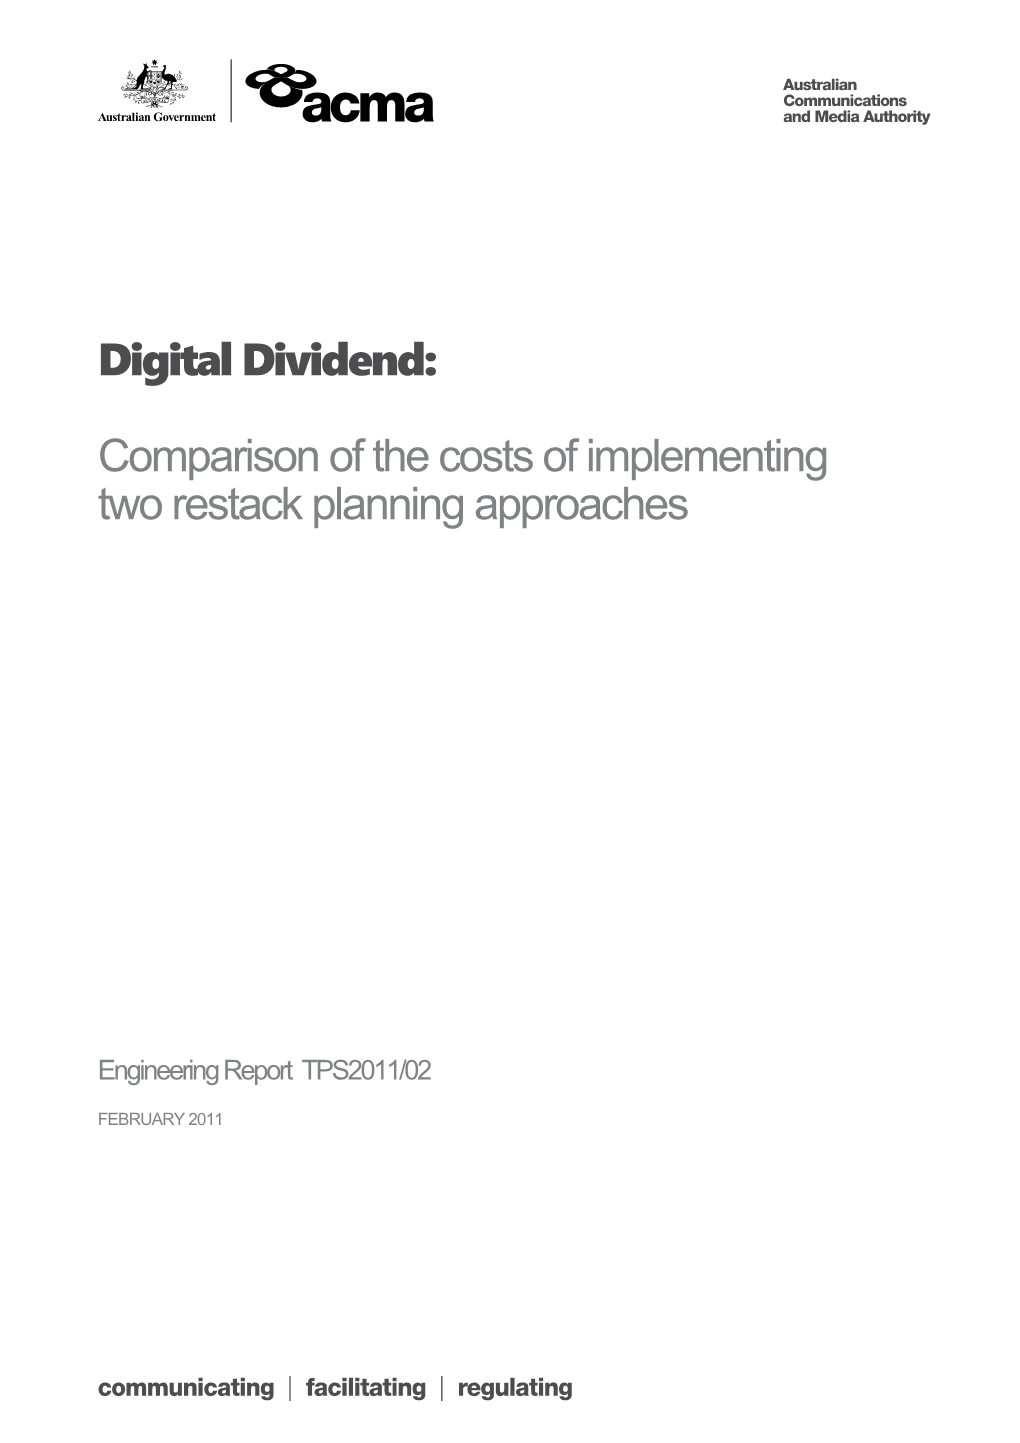 Digital Dividend: Comparison of the Costs of Implementing Two Restack Planning Approaches